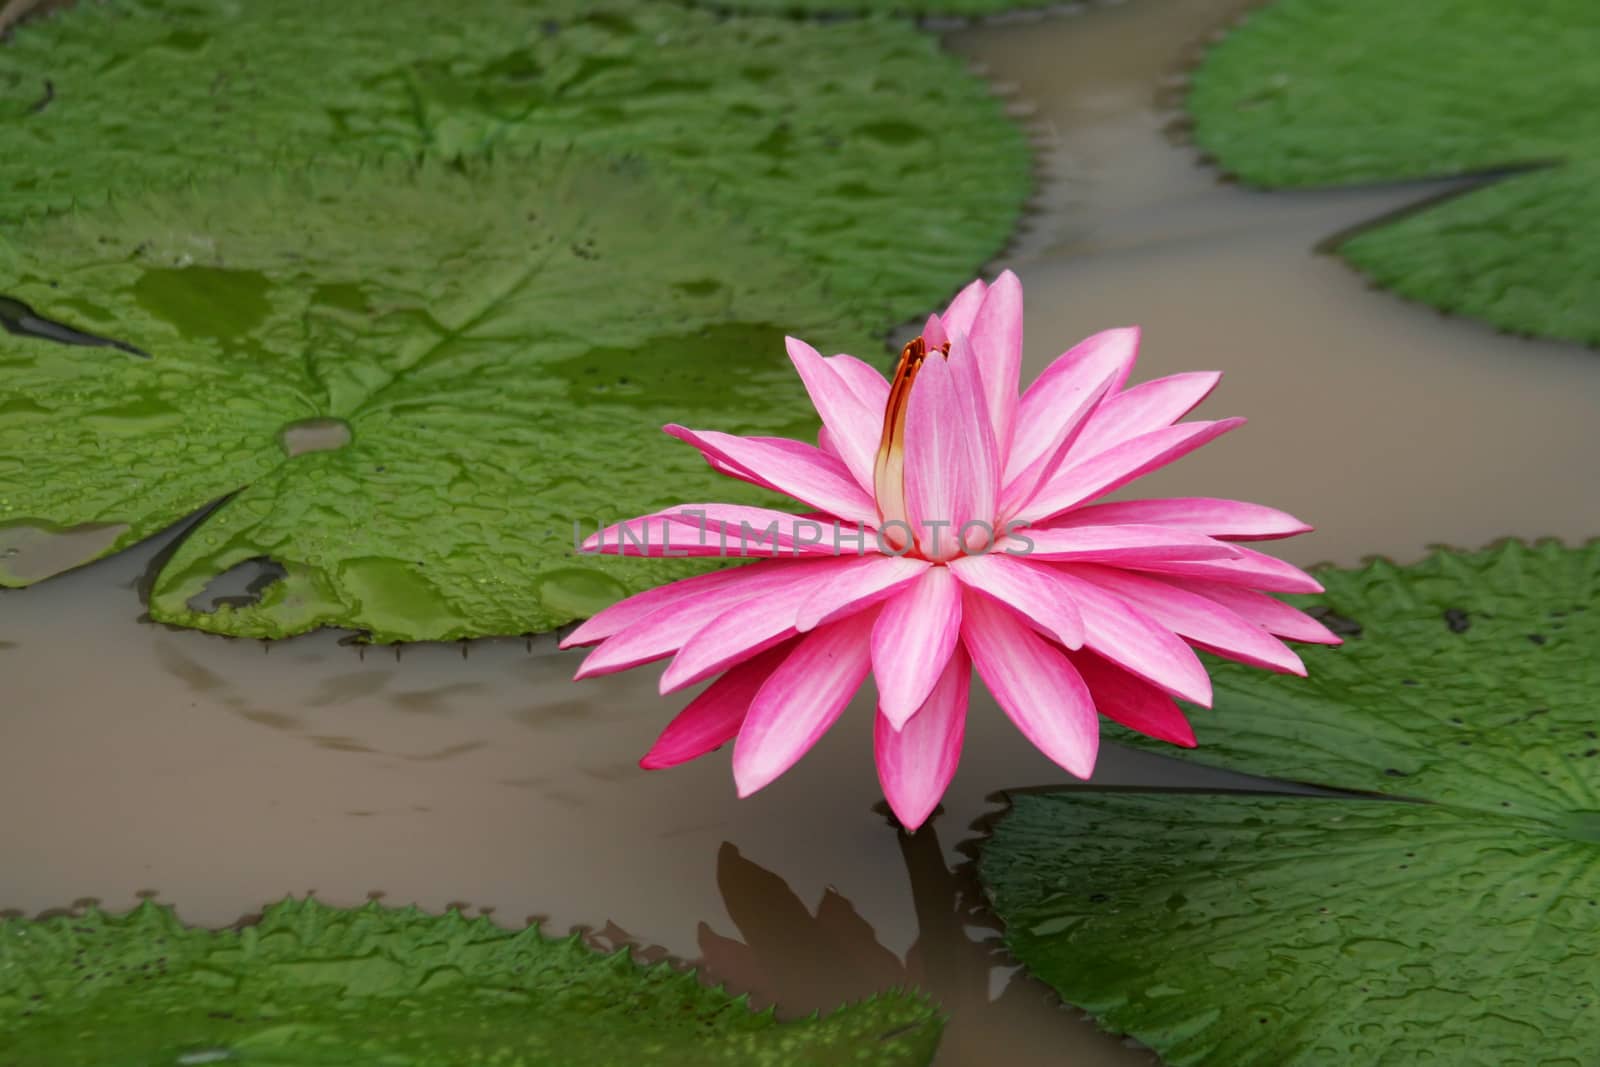 Lotus blossom on the water